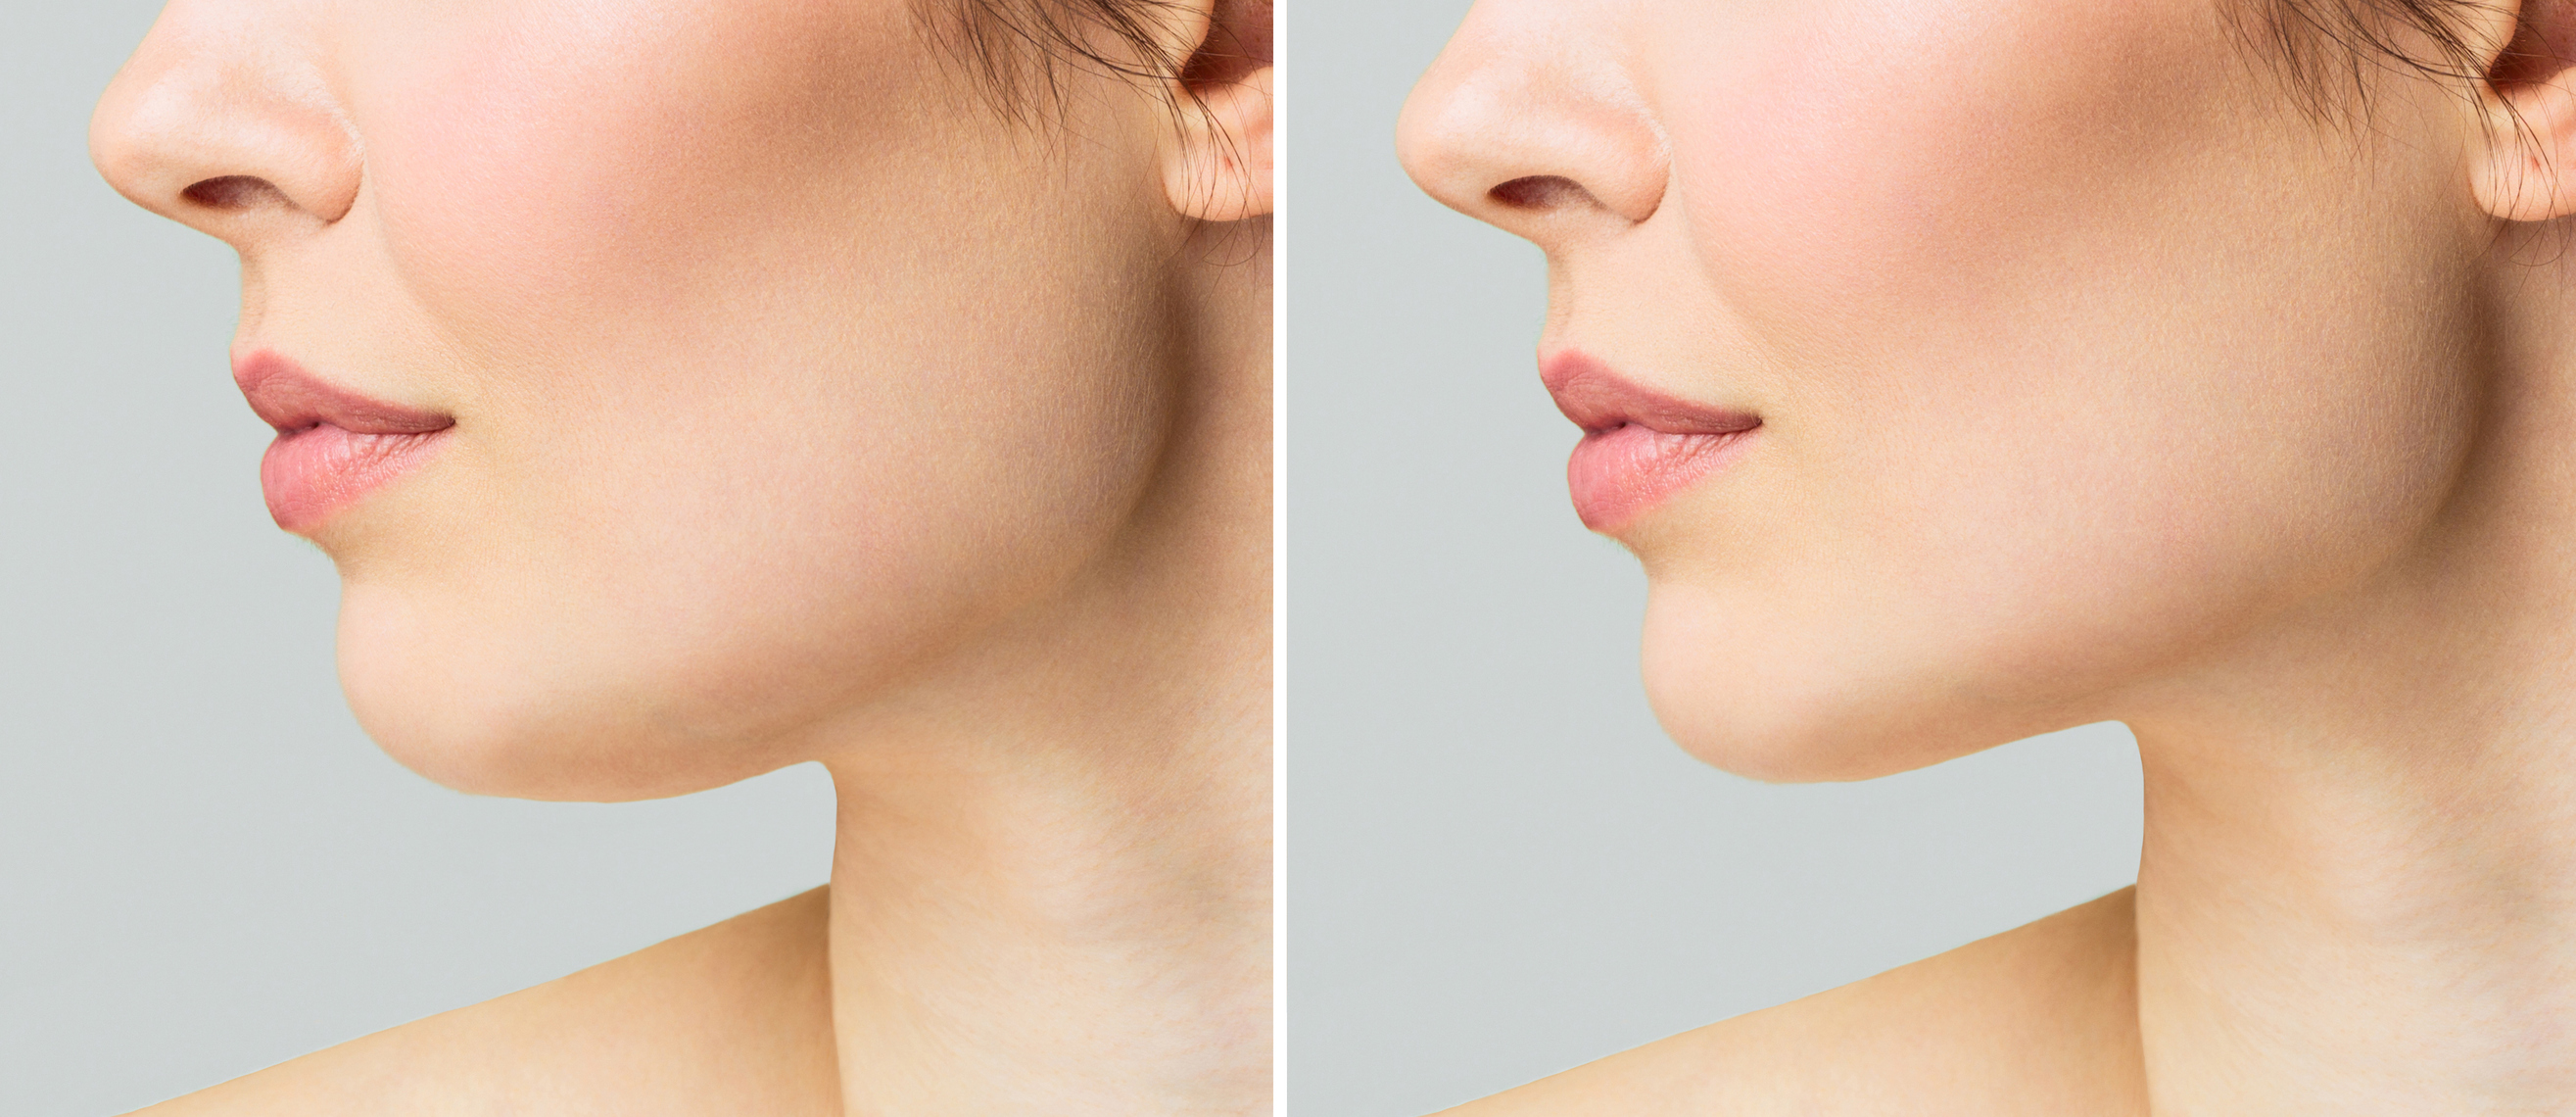 A close portrait of an aged woman before and after Kybella treatment for double chin